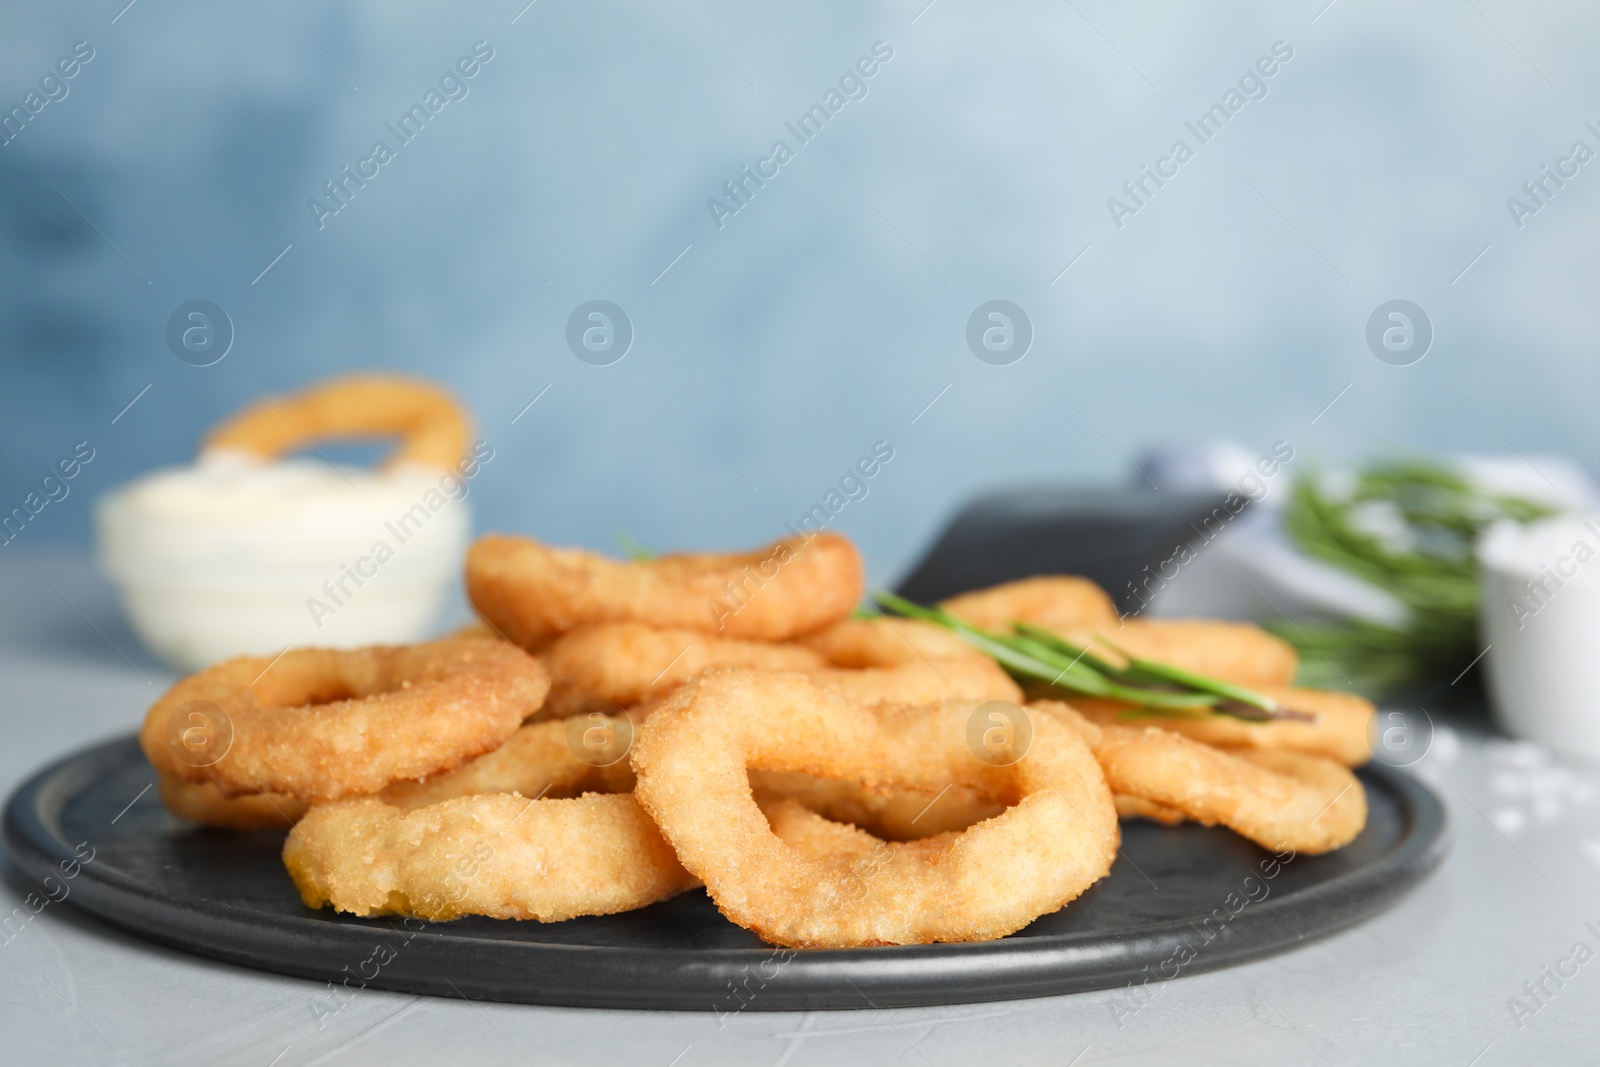 Photo of Fried onion rings served on grey table